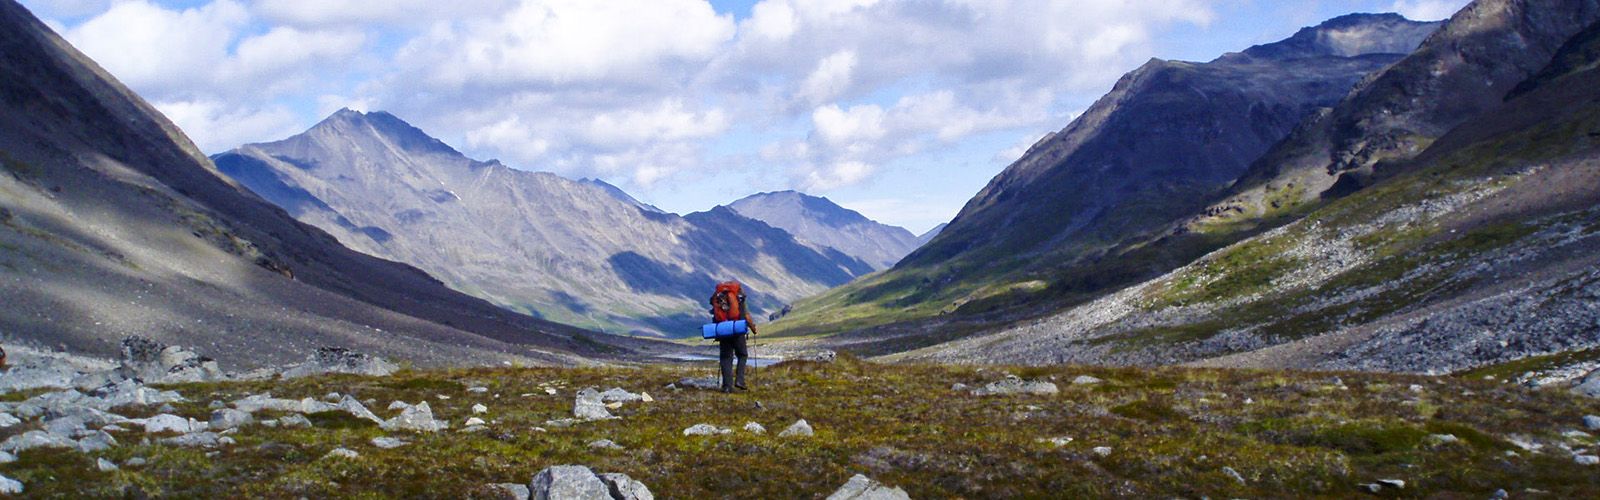 Backpacking over pass on Seven Pass route in Wrangell St. Elias National Park, Alaska